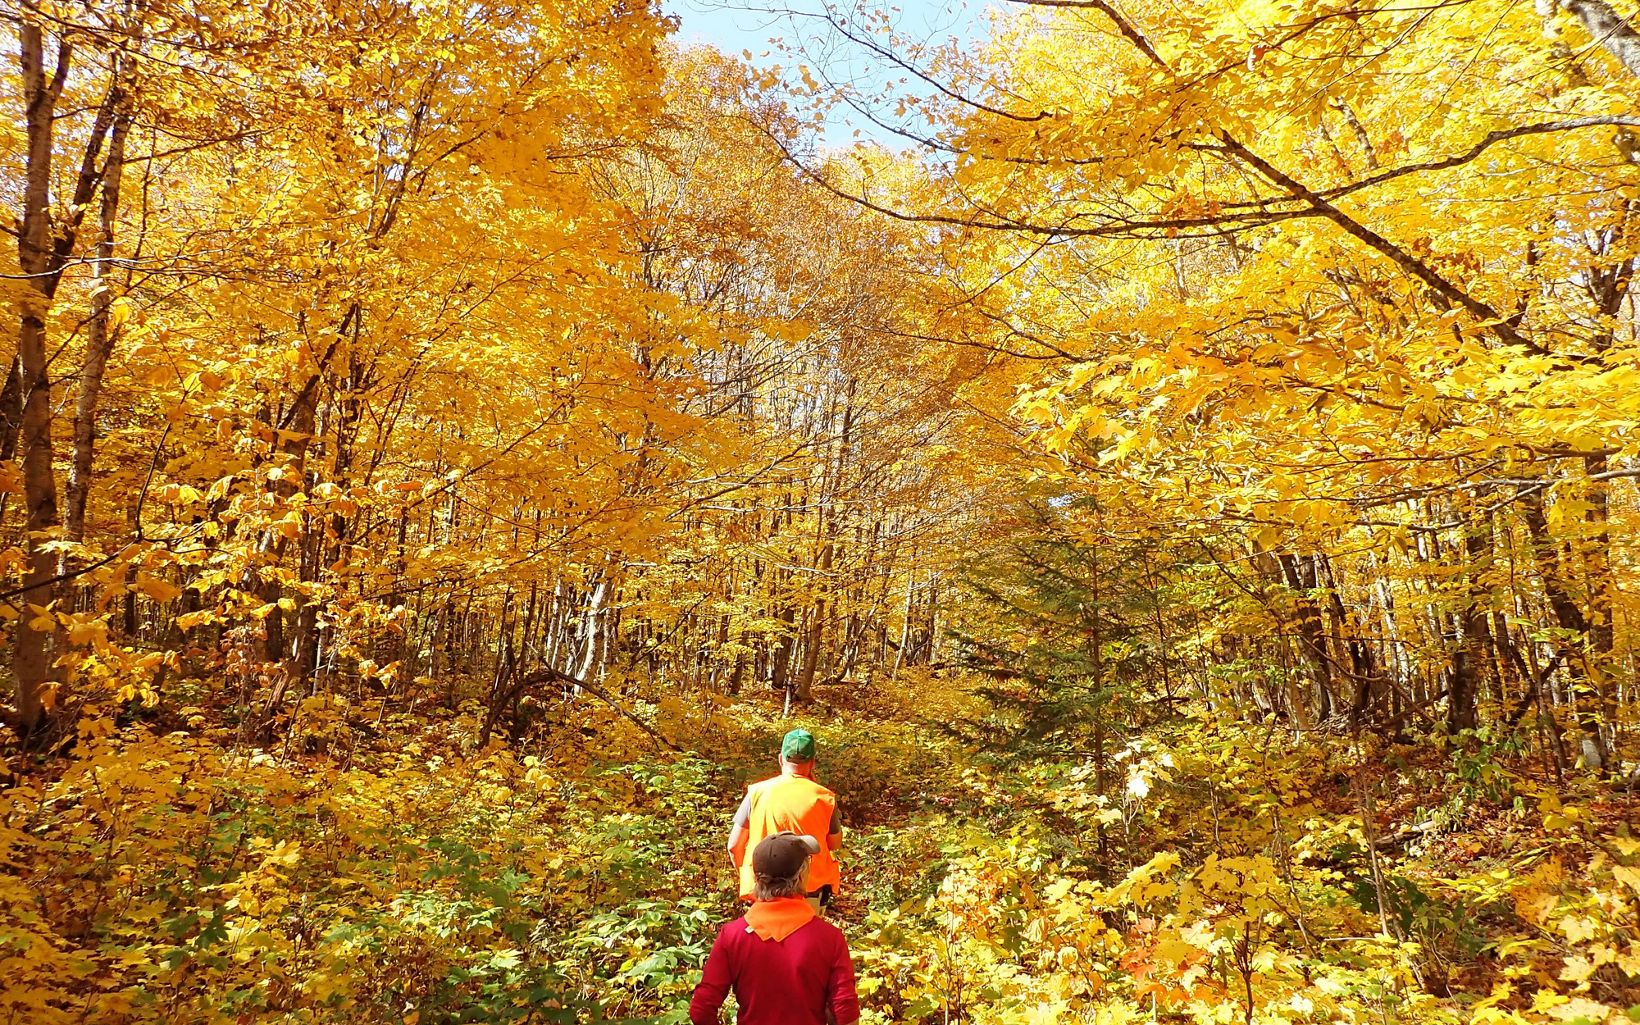 Two people walk on a trail surrounded by brilliant yellow foliage.